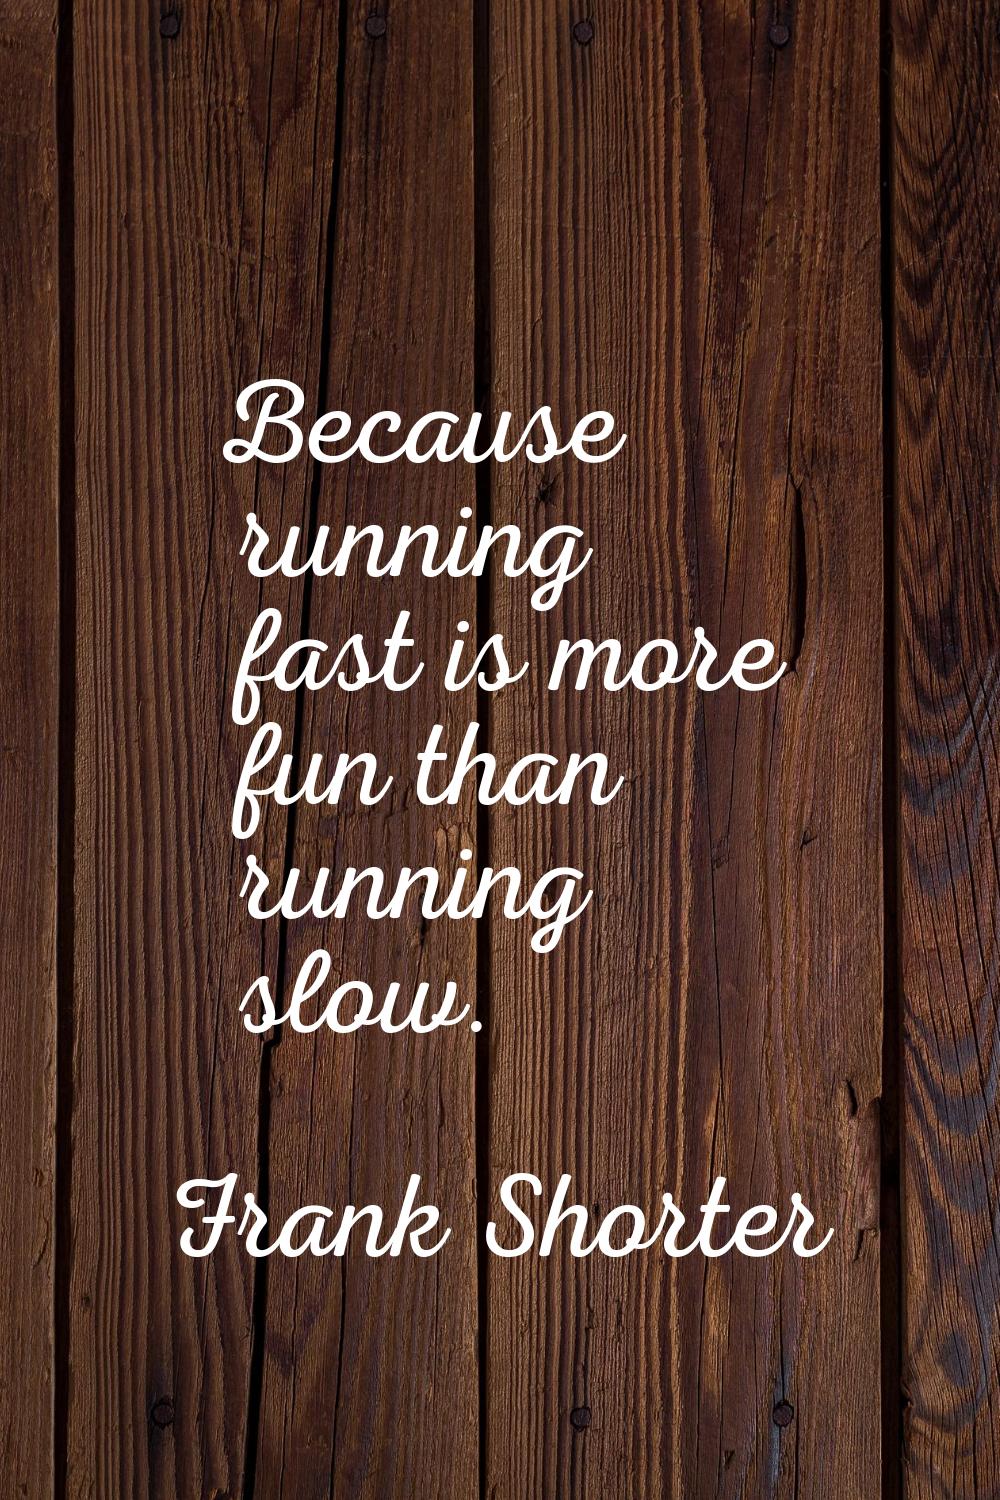 Because running fast is more fun than running slow.